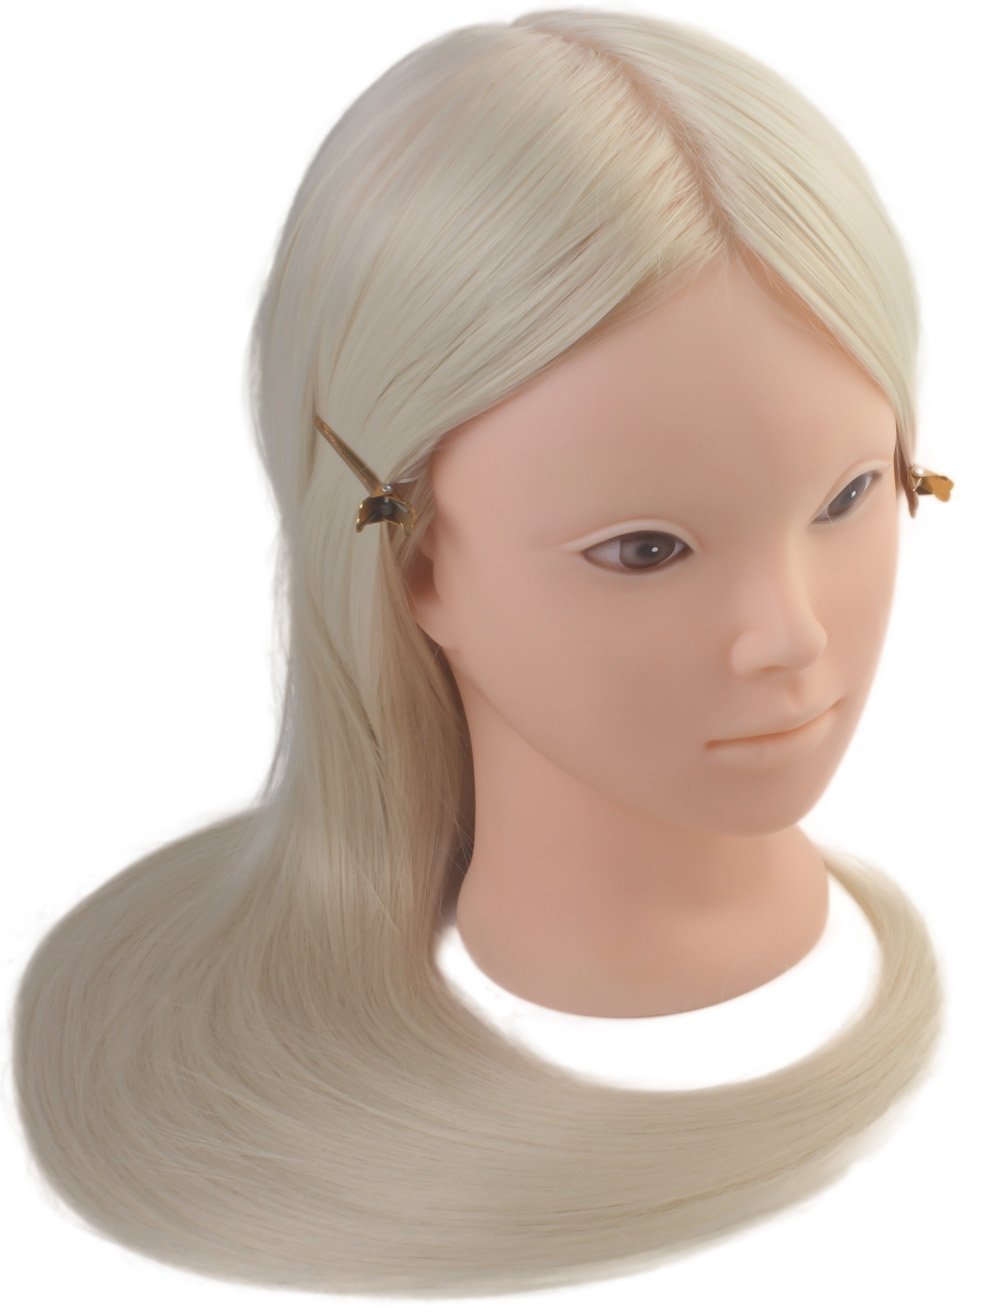  LXIANGN Lash Mannequin Head,Professional Make Up Paint